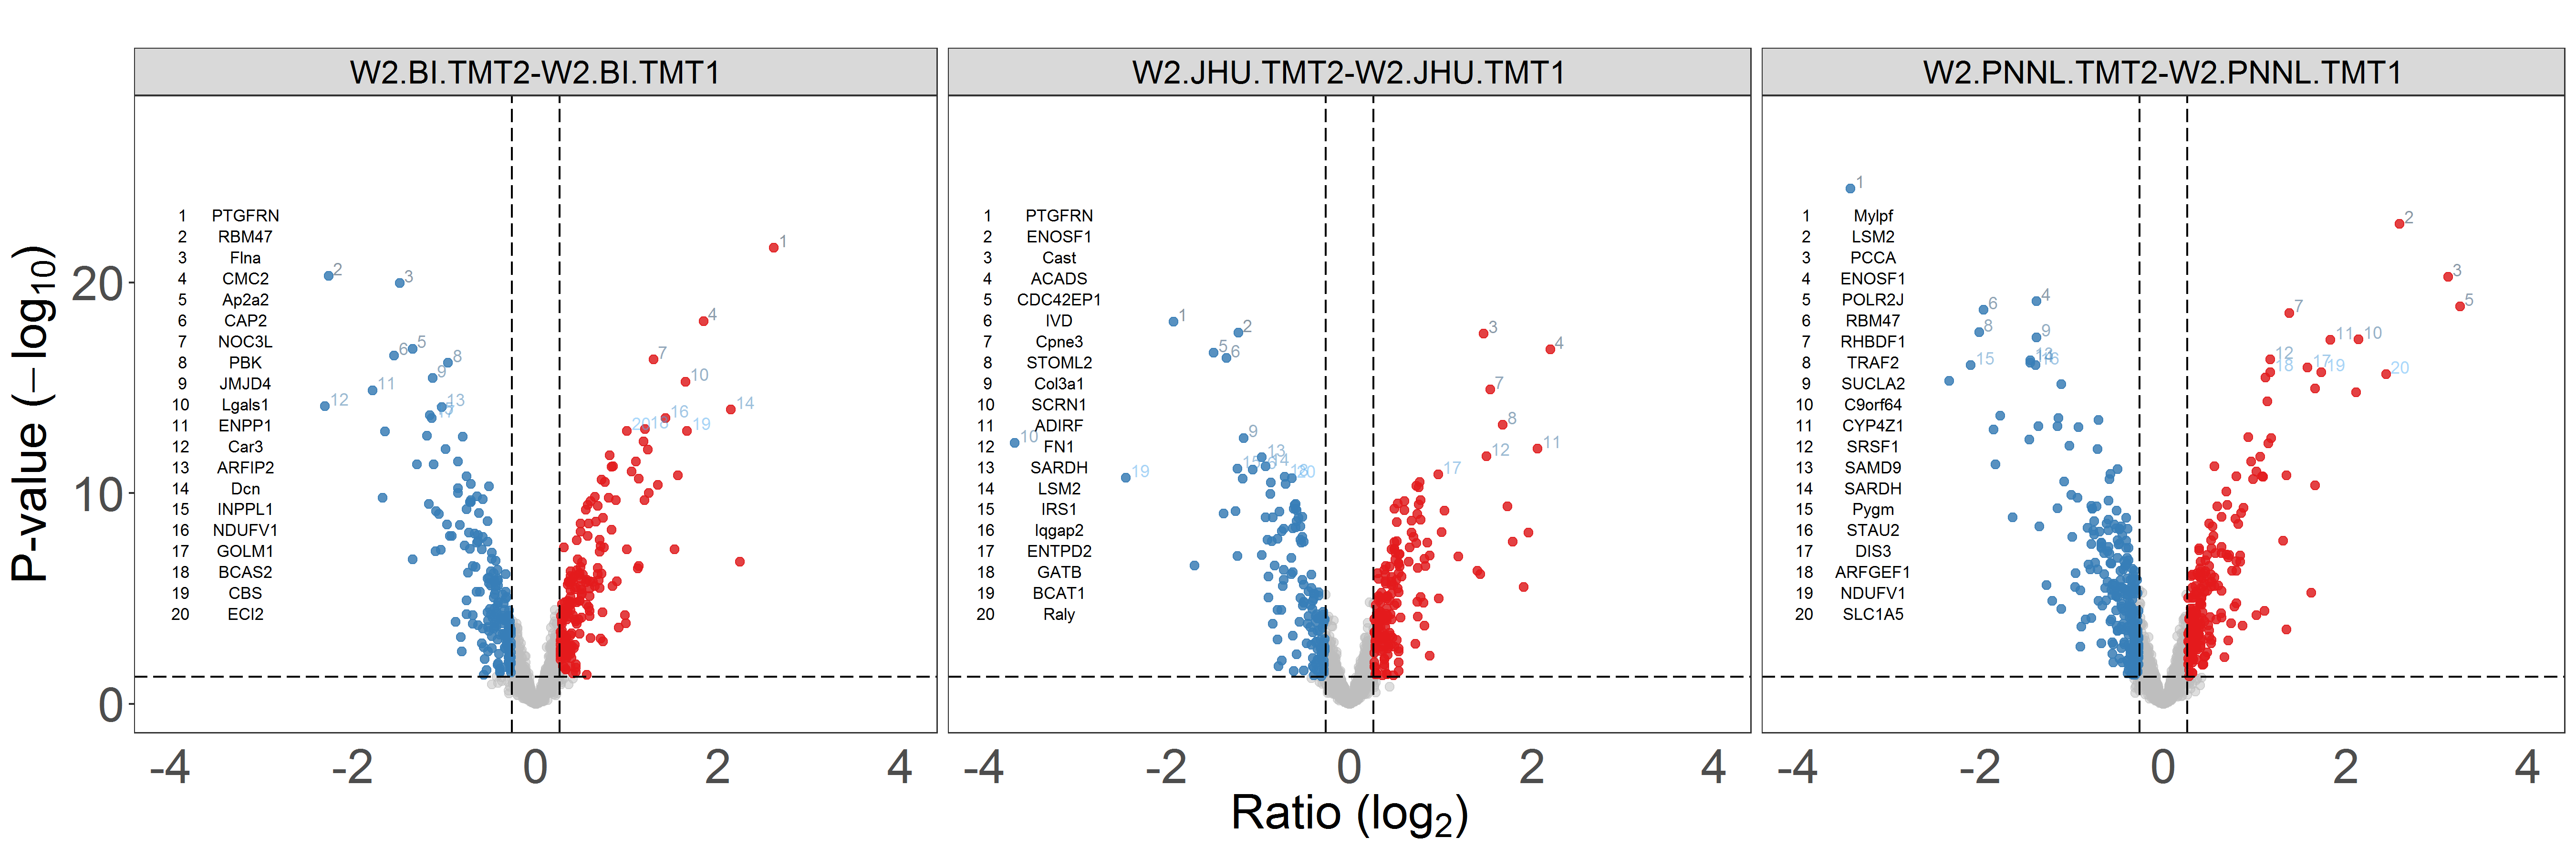 **Figure 7A-7B.** Volcano plots of protein log2FC. Left: between batches; right: between locations.